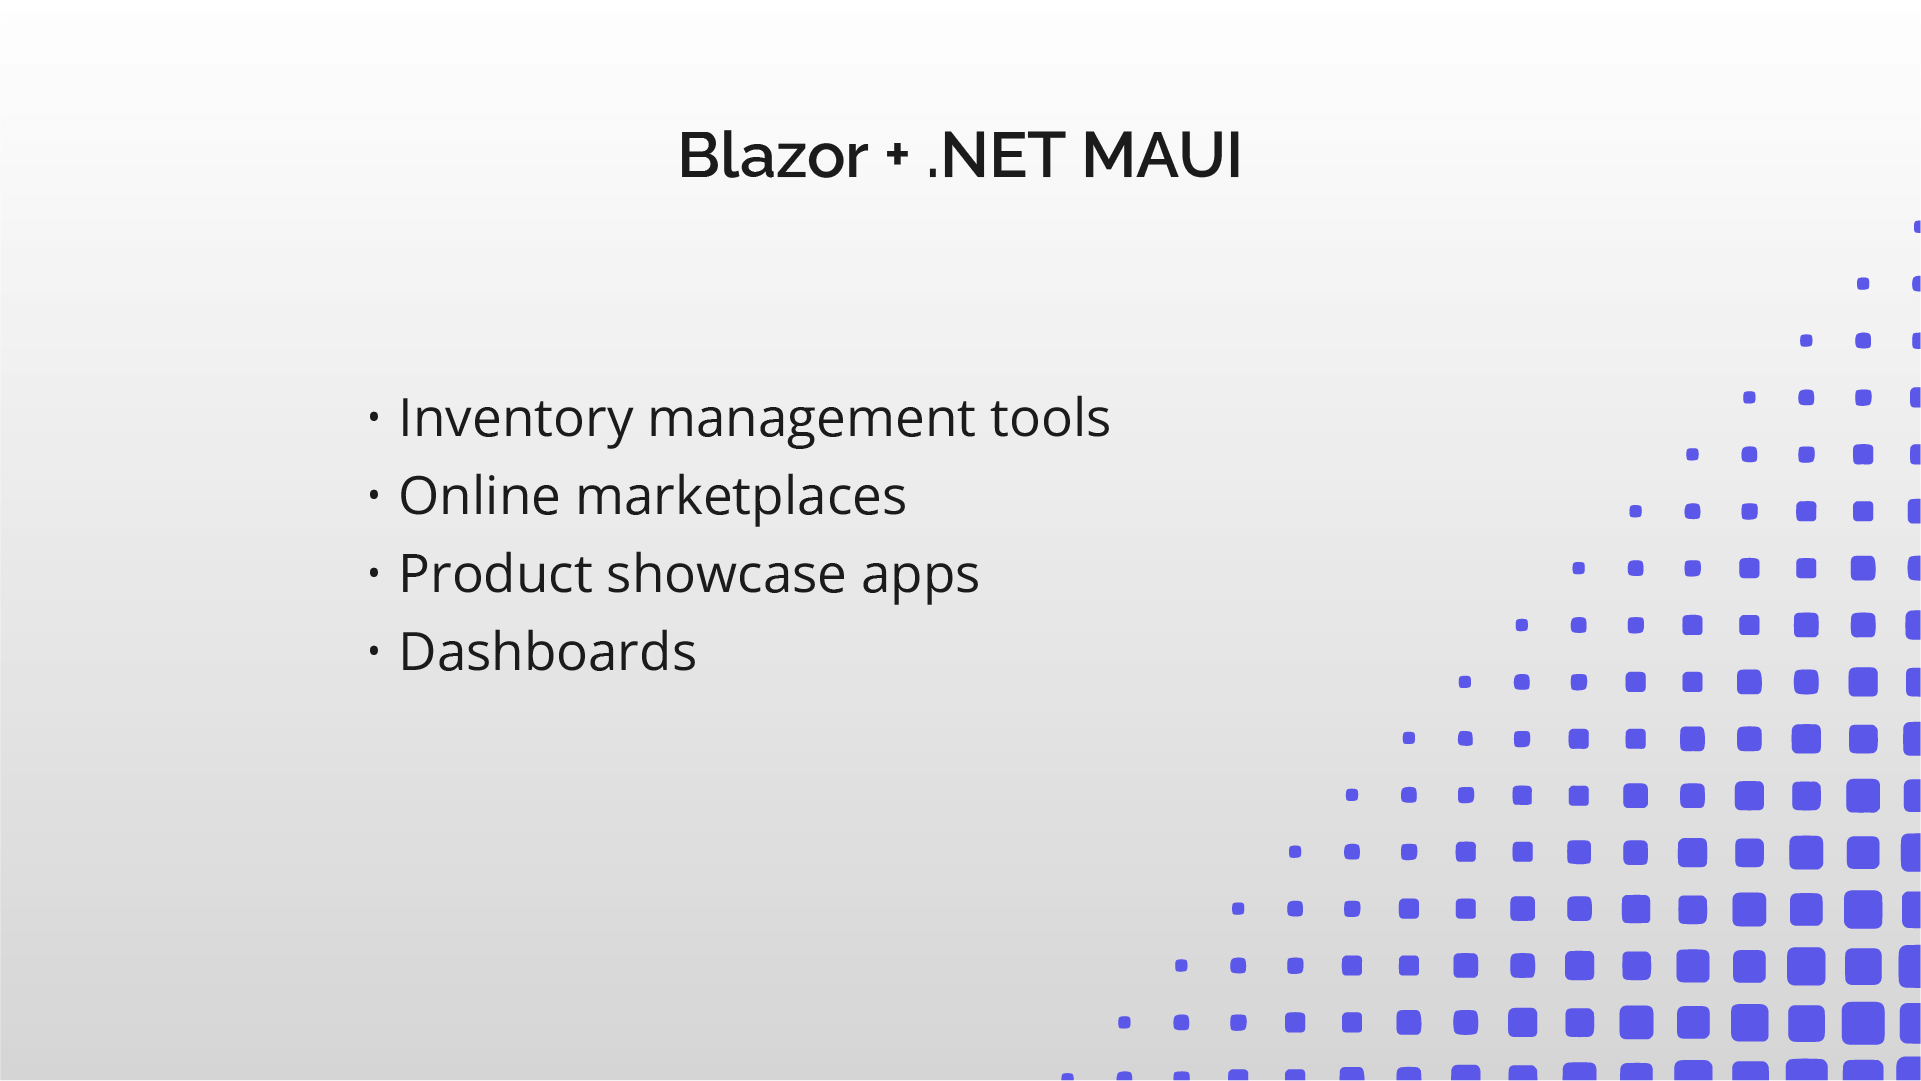 Examples of combining Blazor with .NET MAUI for e-commerce projects